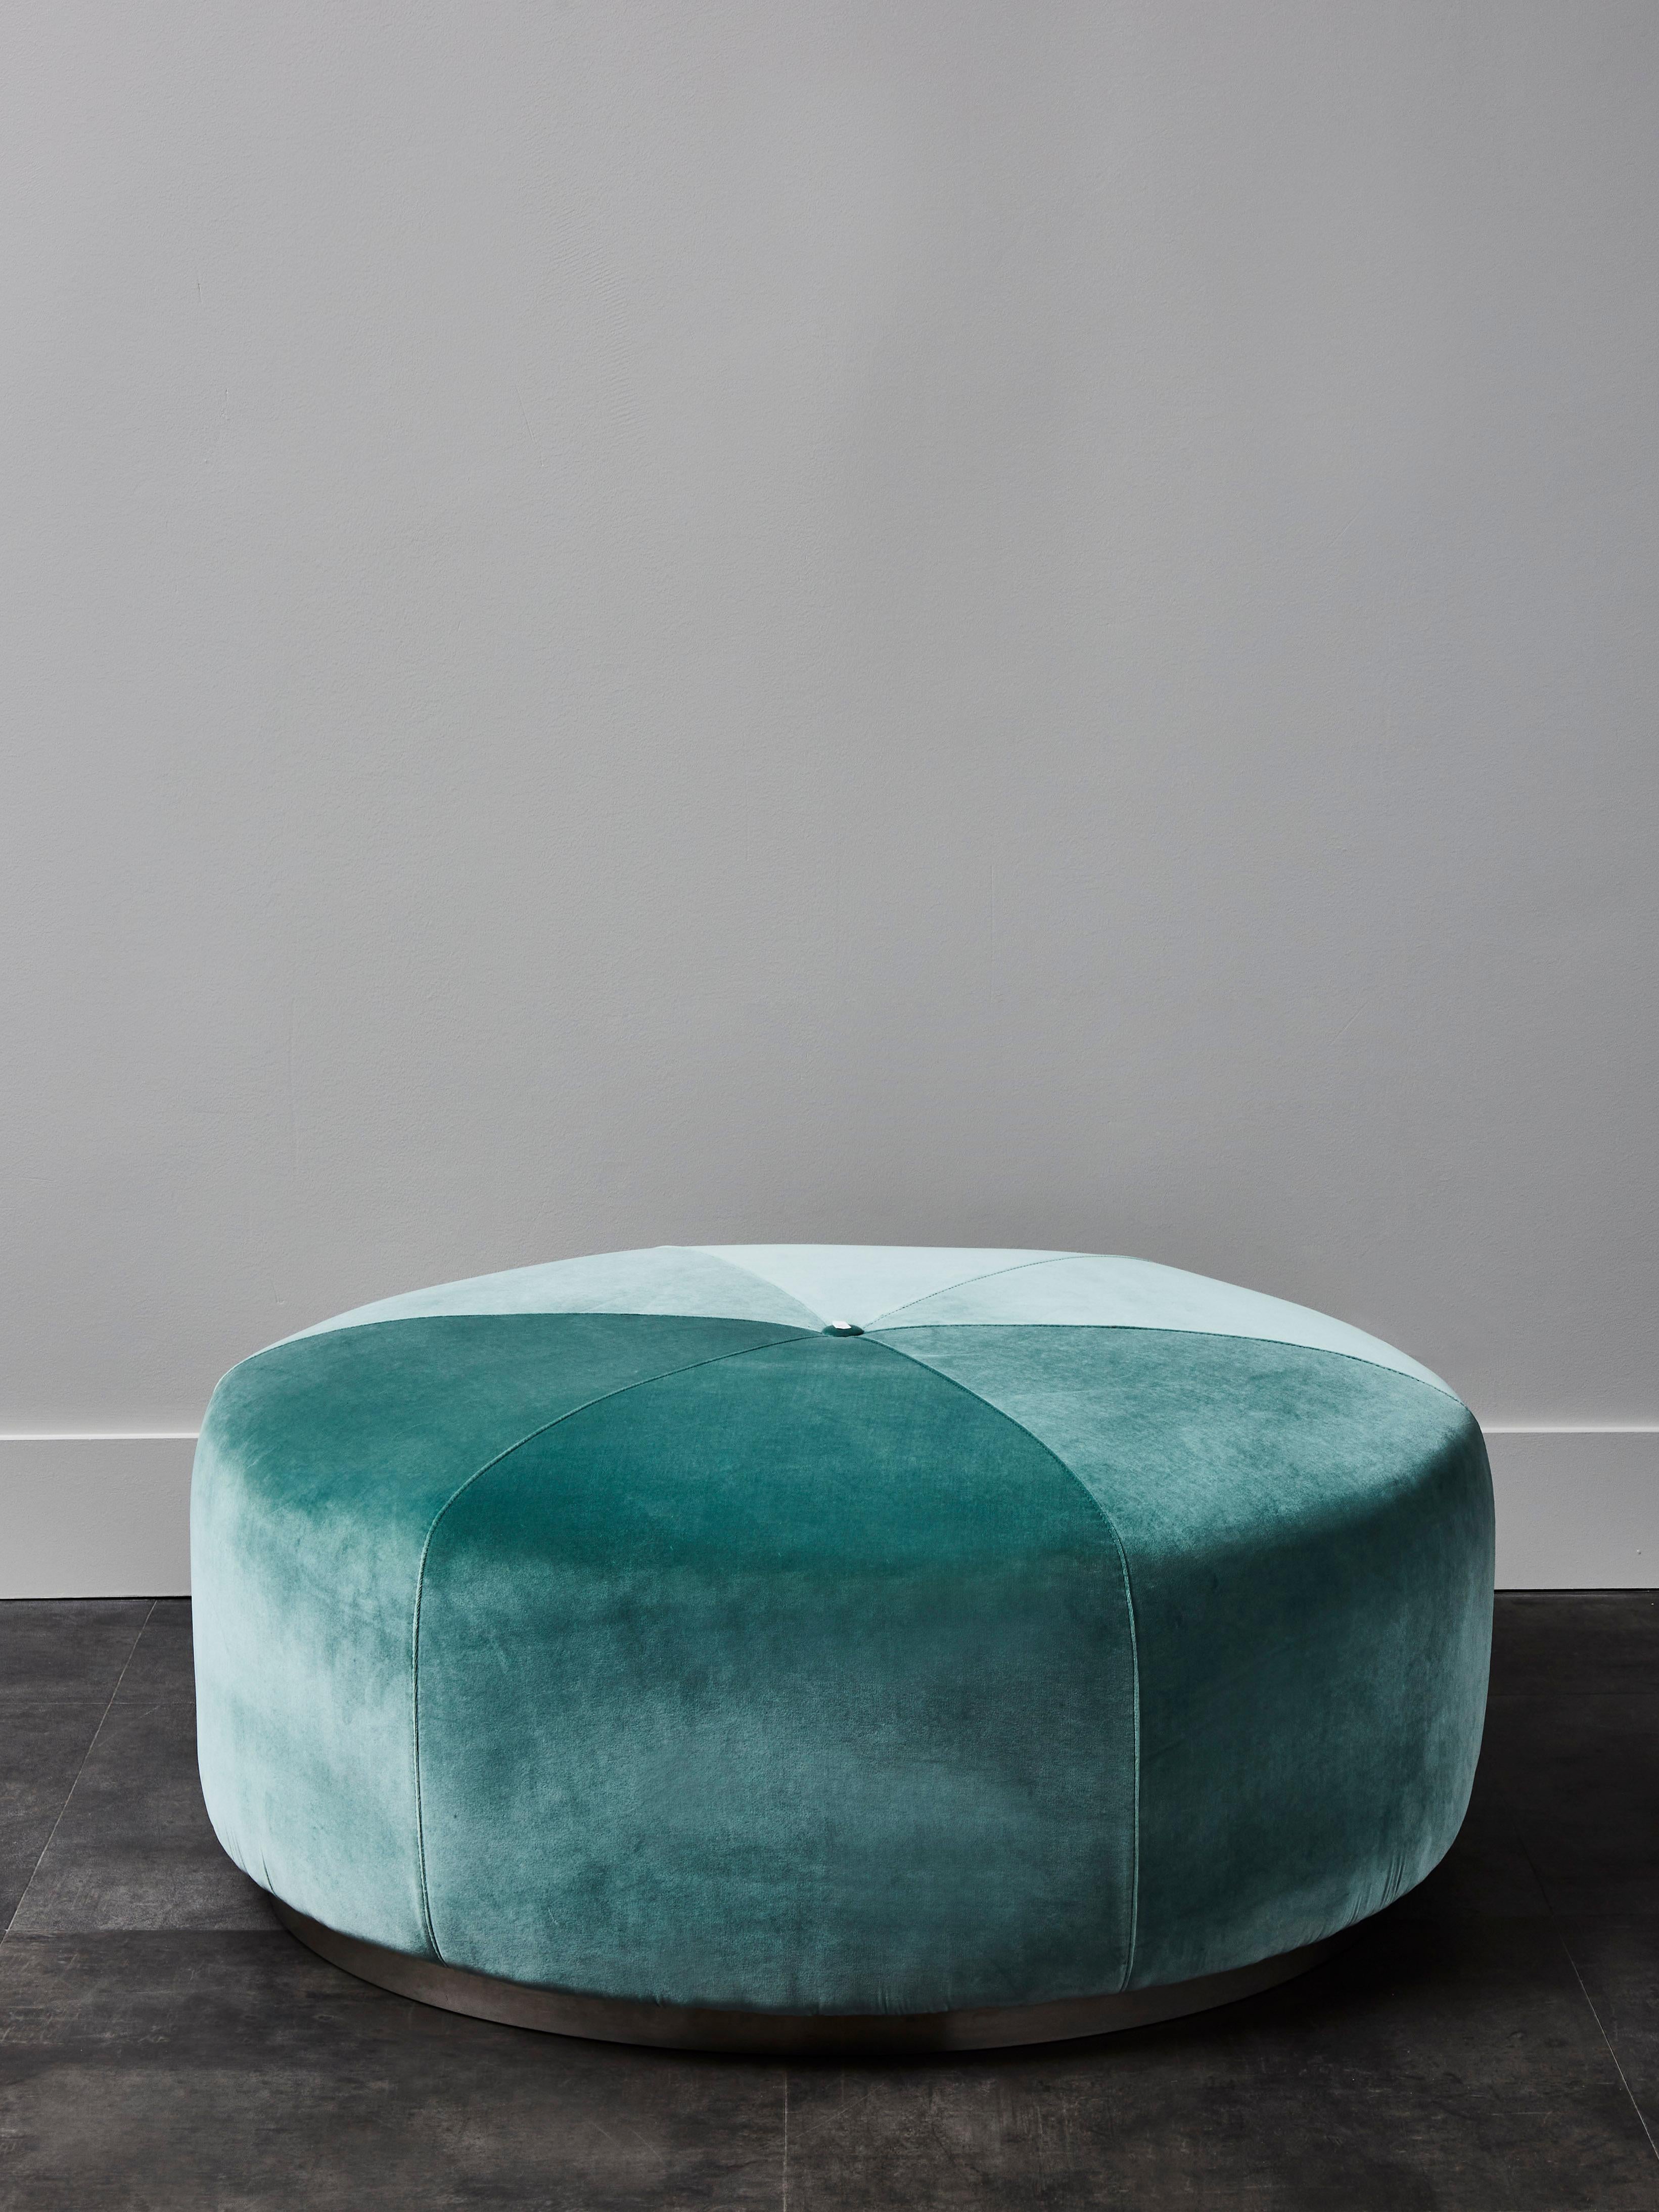 Superb vintage round stool with steel base. Entirely restored and reupholstery with a turquoise velvet.
Pair available.
Italie, 1970s.